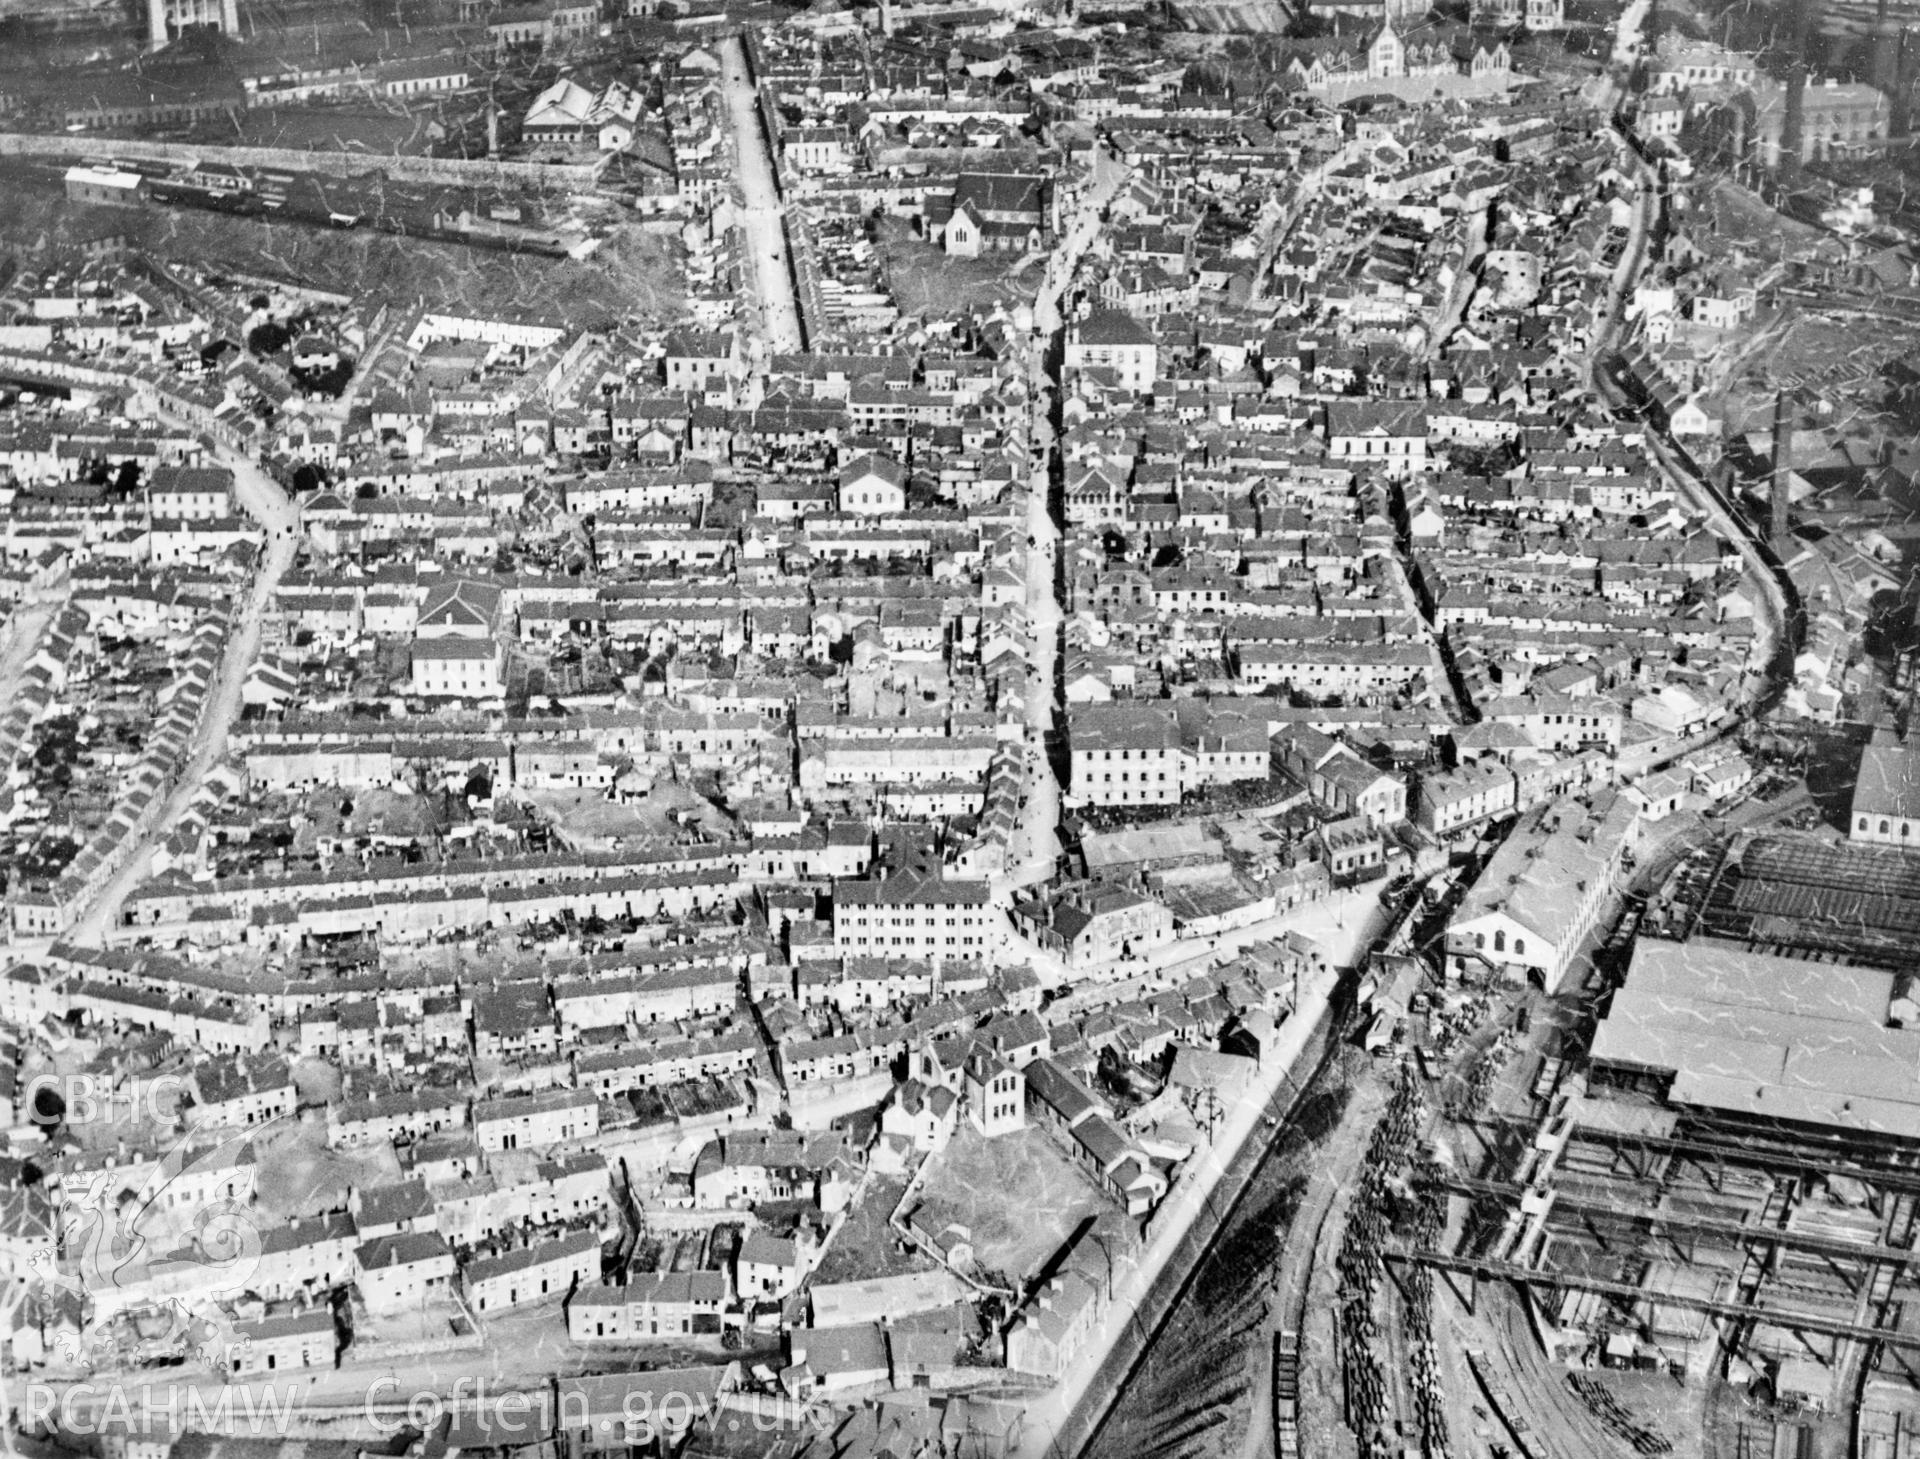 General view of Merthyr Tydfil. Oblique aerial photograph, 5?x4? BW glass plate.